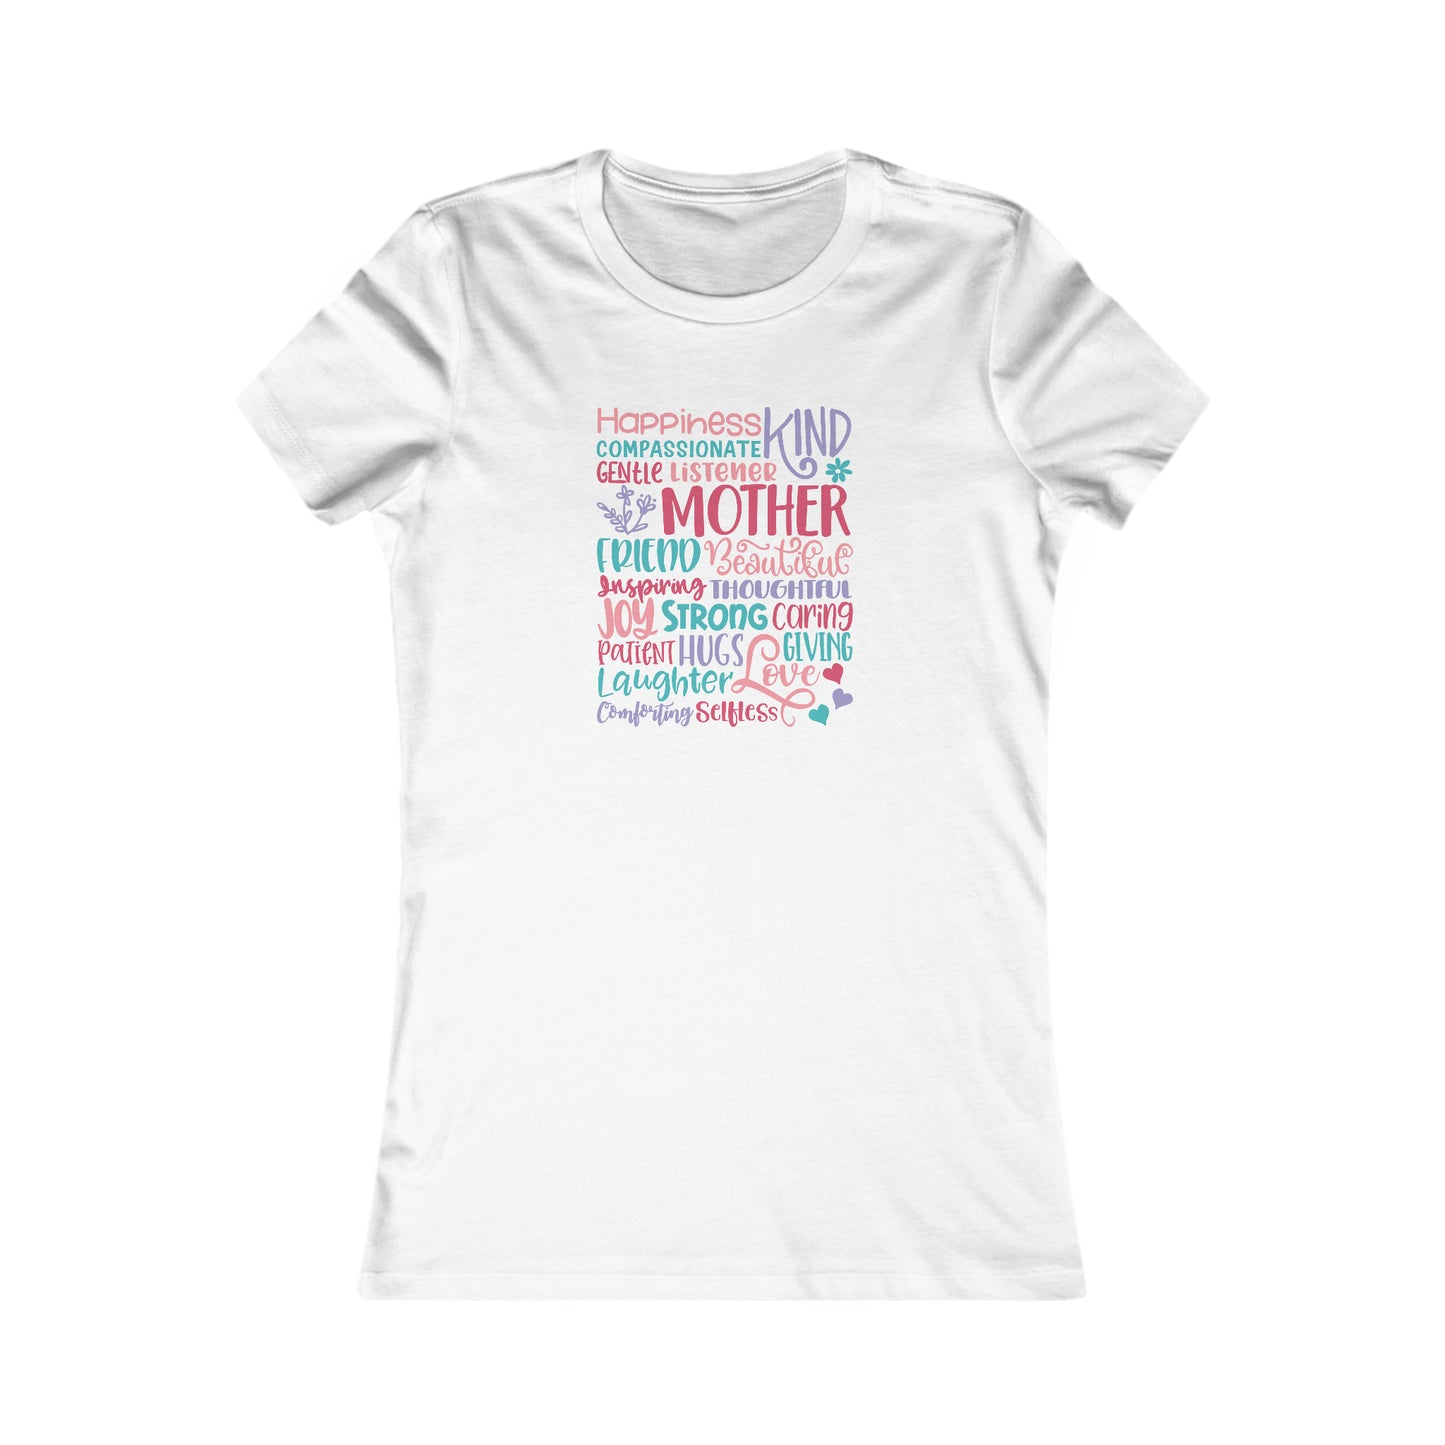 Mom Qualities Subway in Color - Best Mom - Celebrate Mom - Strong Woman - Mom Humor - Women's Favorite Tee